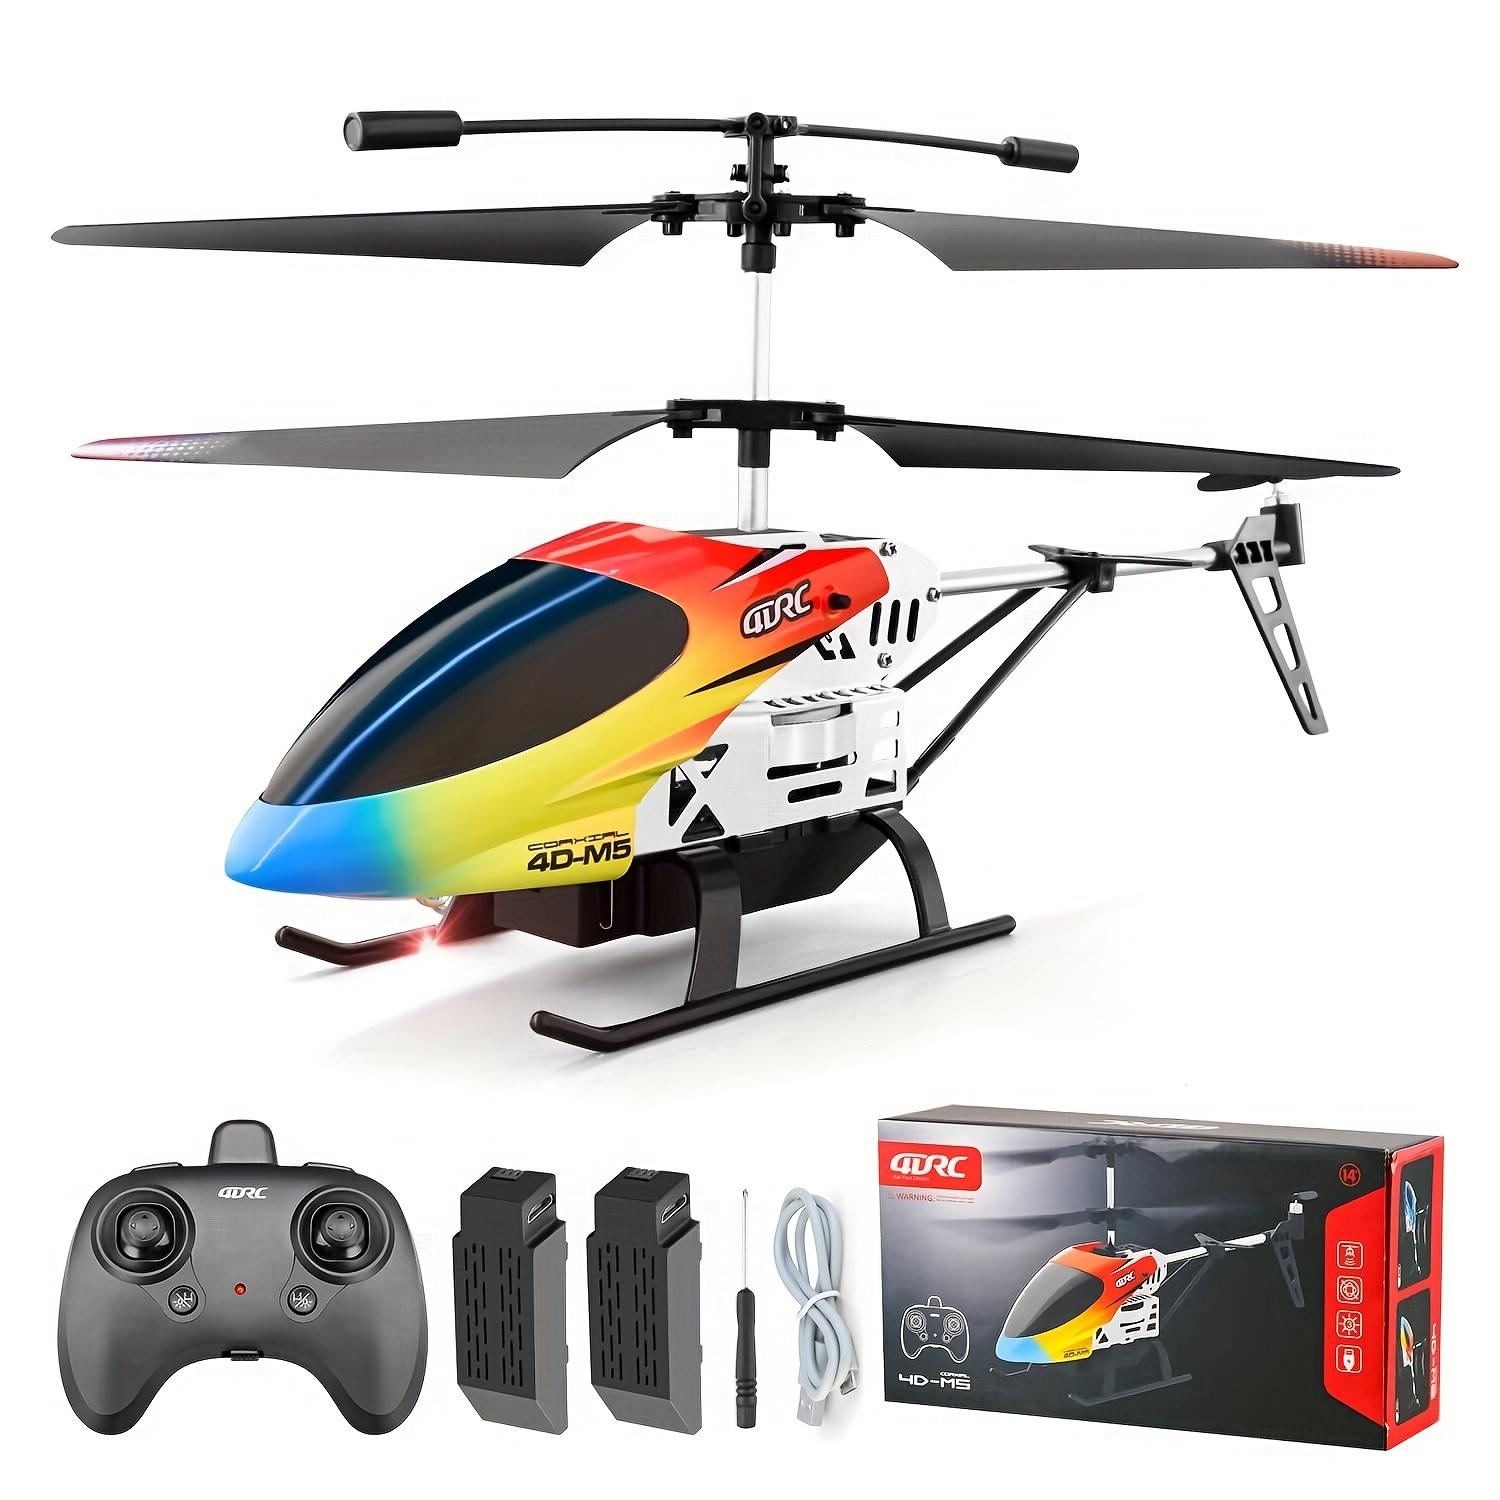 Tamiya Rc Helicopter: User-friendly features and attractive designs make Tamiya RC helicopters a top choice for beginners and hobbyists